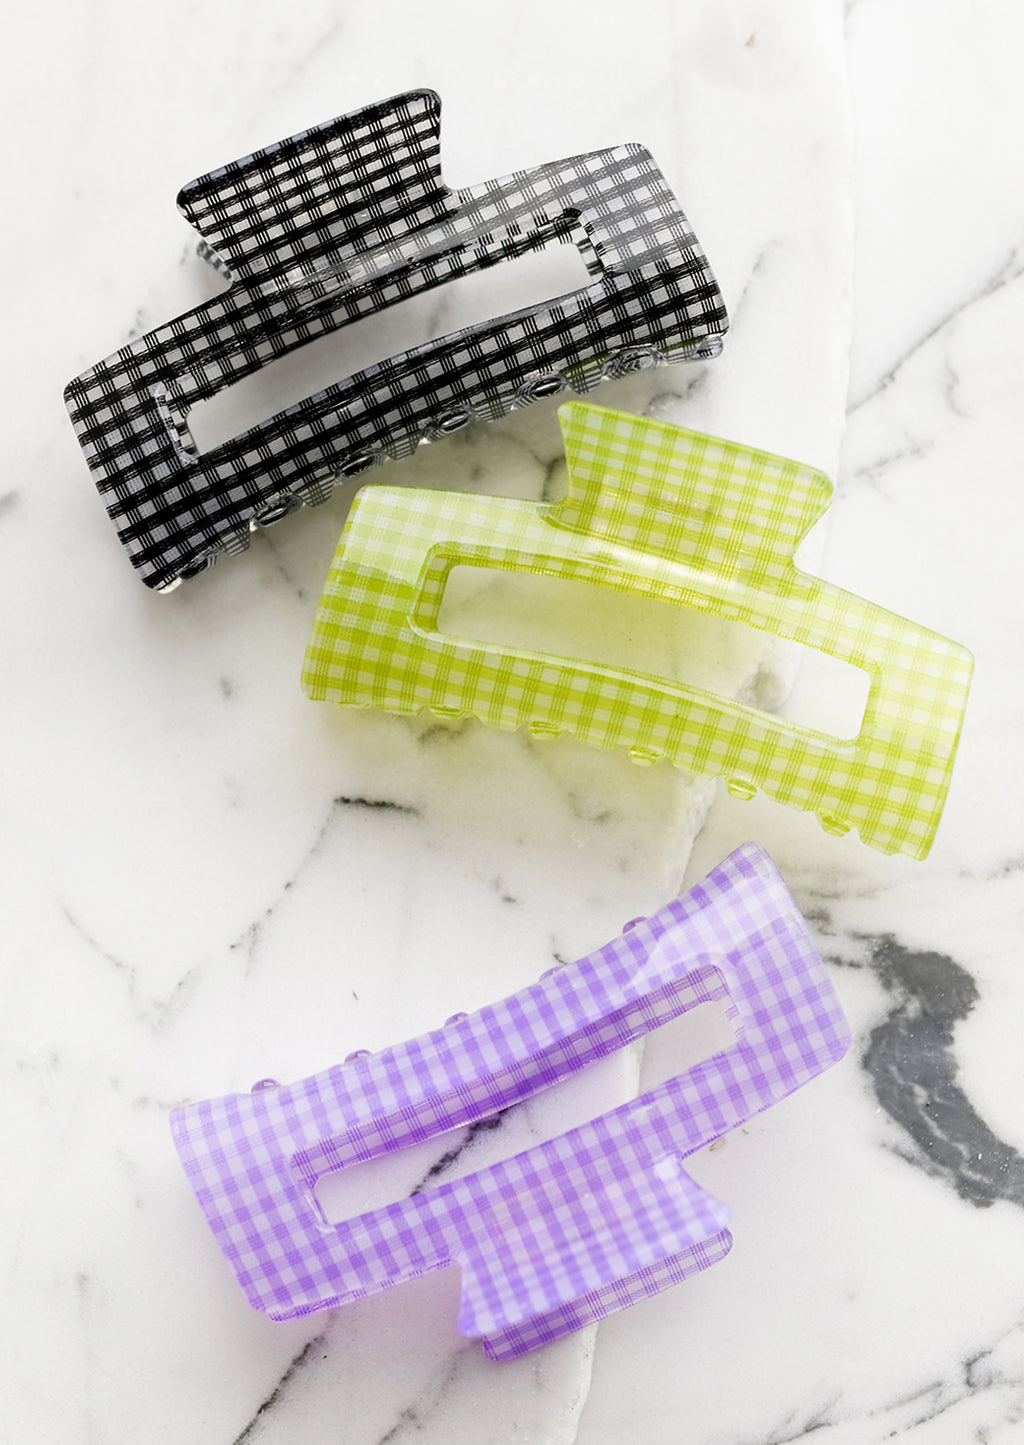 2: Three gingham print hair clips in assorted colors.